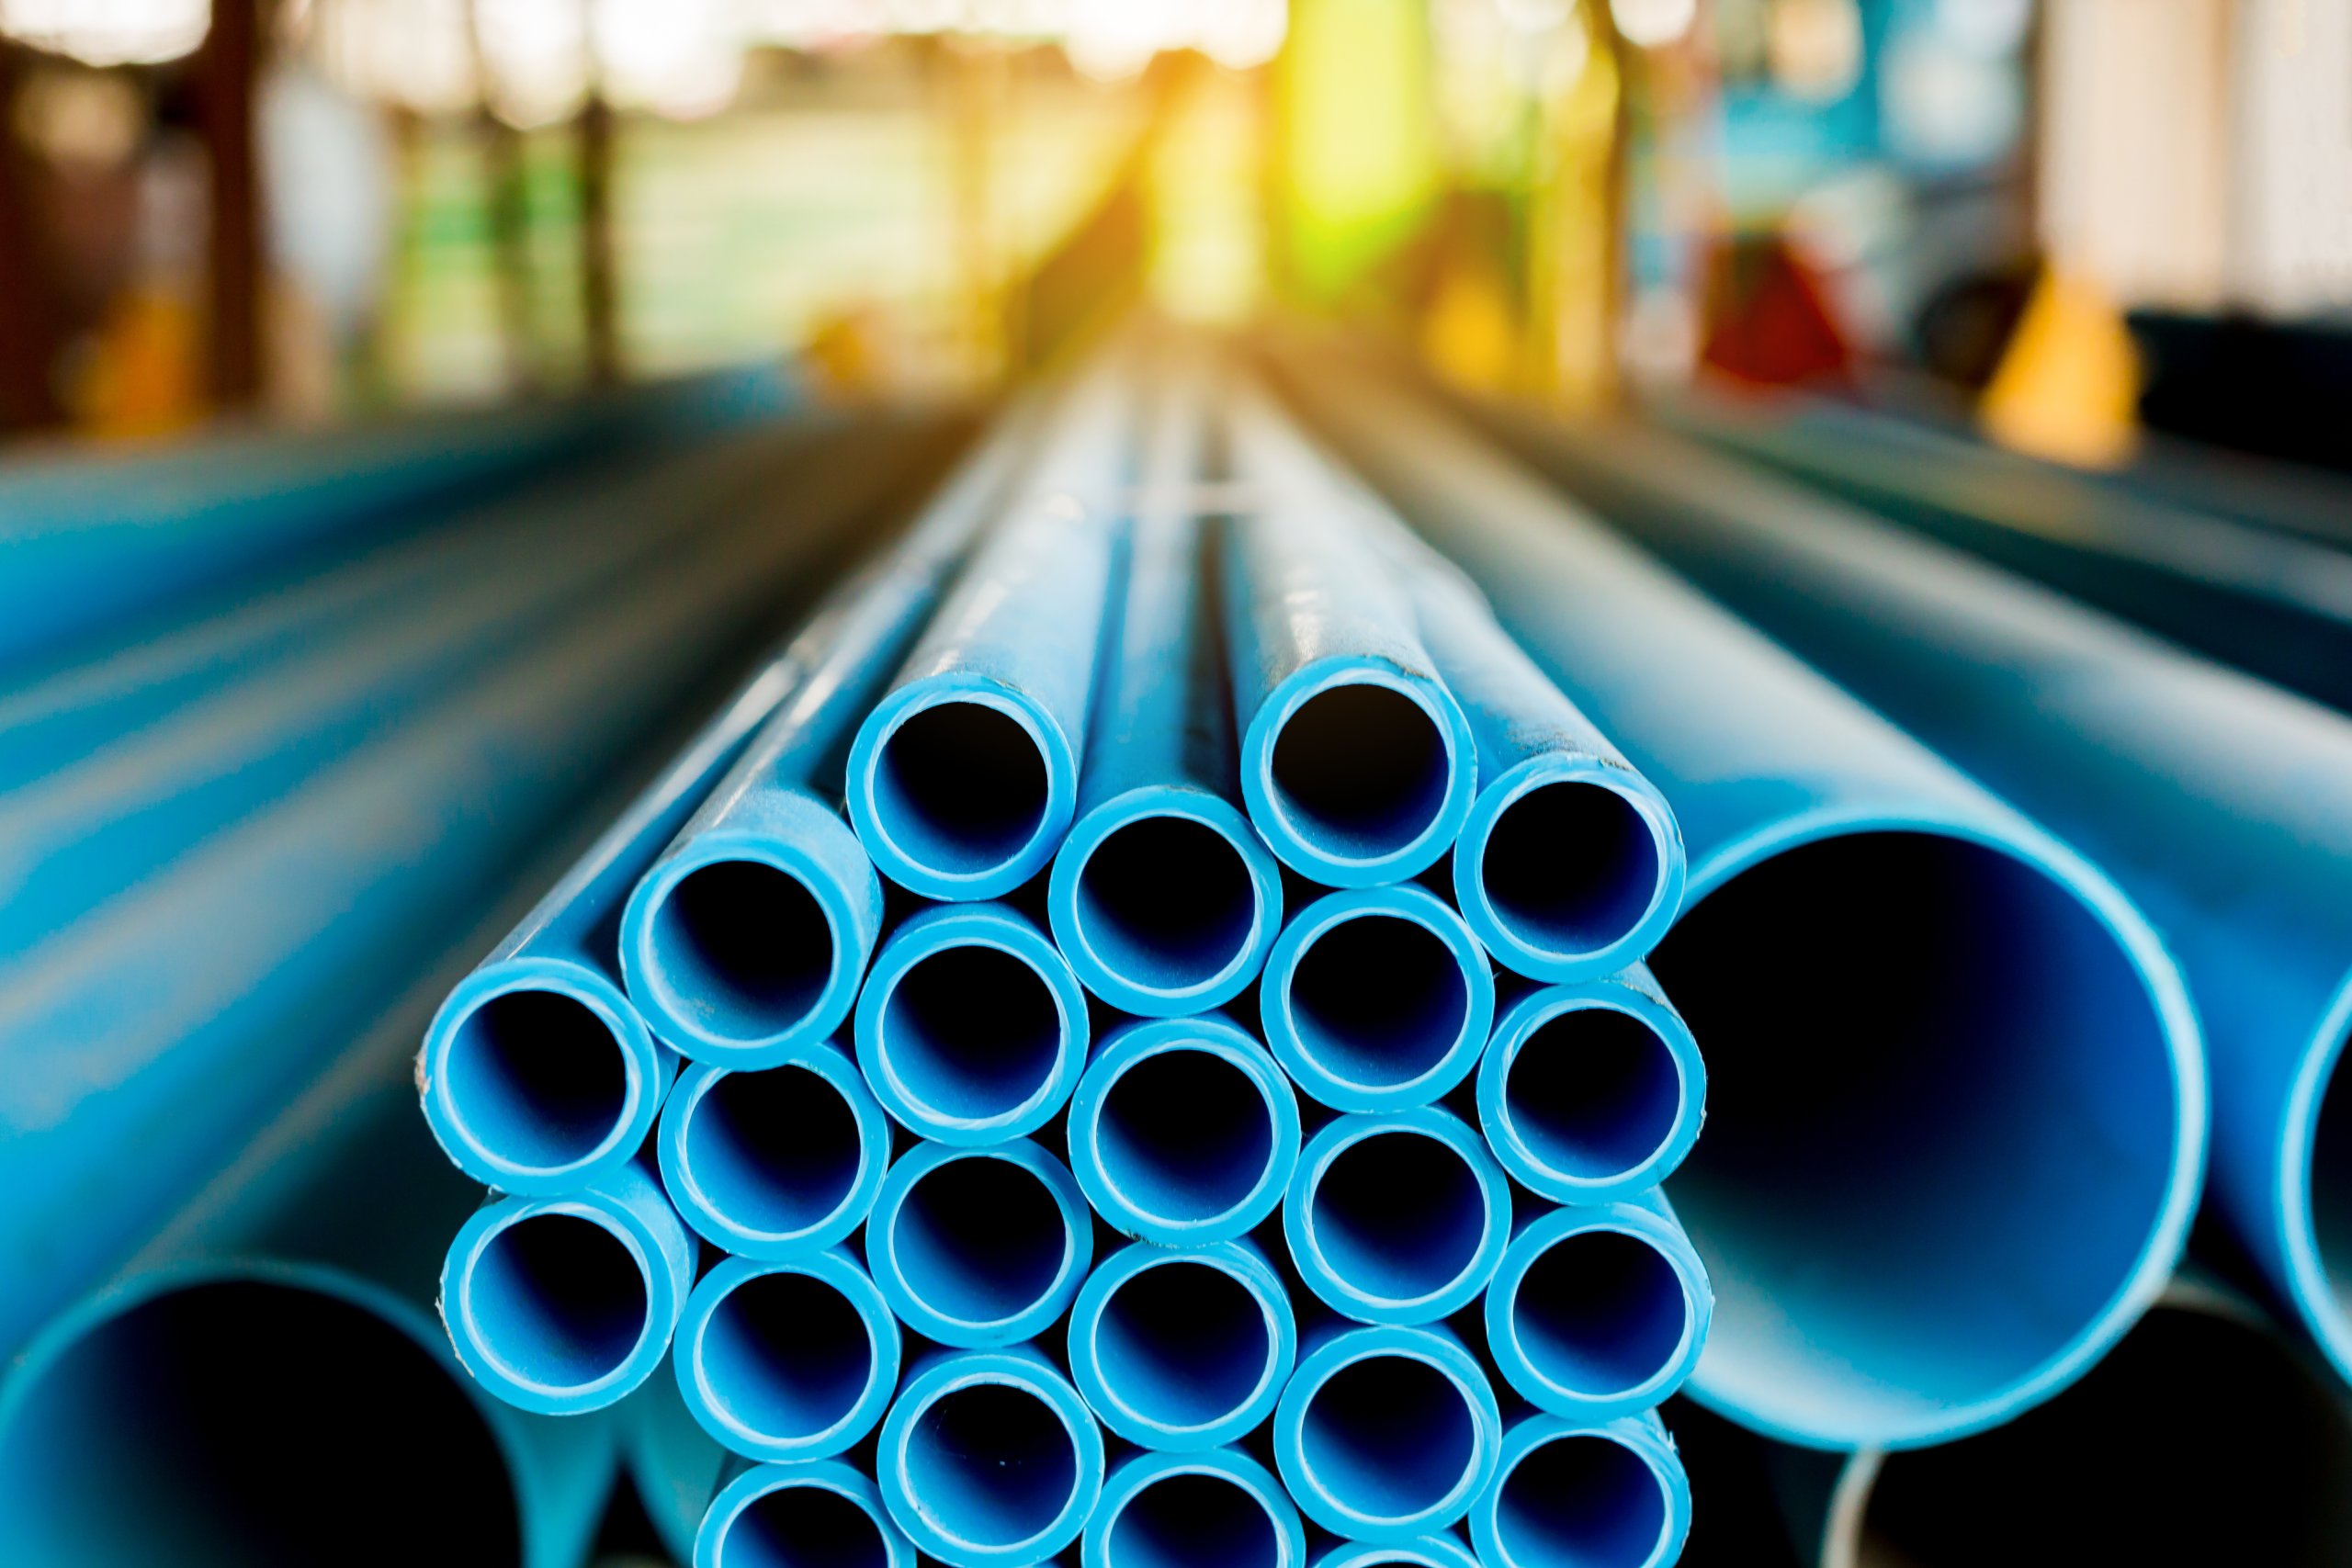 Plastic pipes used in construction